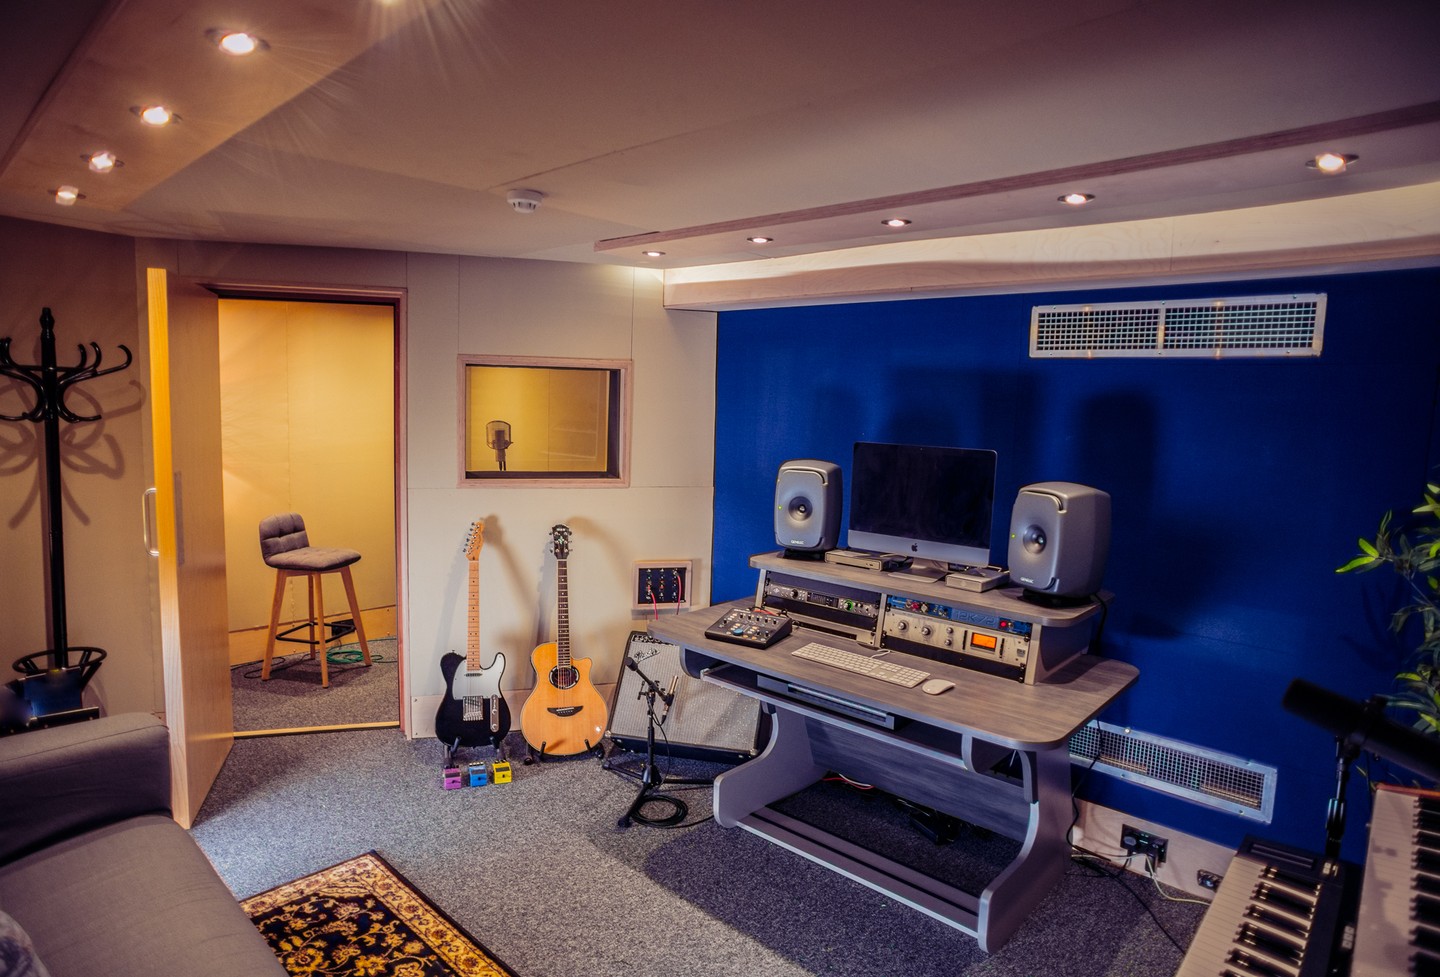 ✍️ Want the perfect songwriting getaway?

Suite 2 at Metropolis Studios is the place for you, now available for dry hire. 

️ Assistance will be provided with setting up and a runner will be on hand from 10 am to 6 pm.
️ The room is equipped with a Zaor Studio Desk.
️ Parking is available upon request - limited availability.

To make enquiries about this room or to learn more, message us here or contact: studios@https://www.thisismetropolis.com

📸: @toxrowlang